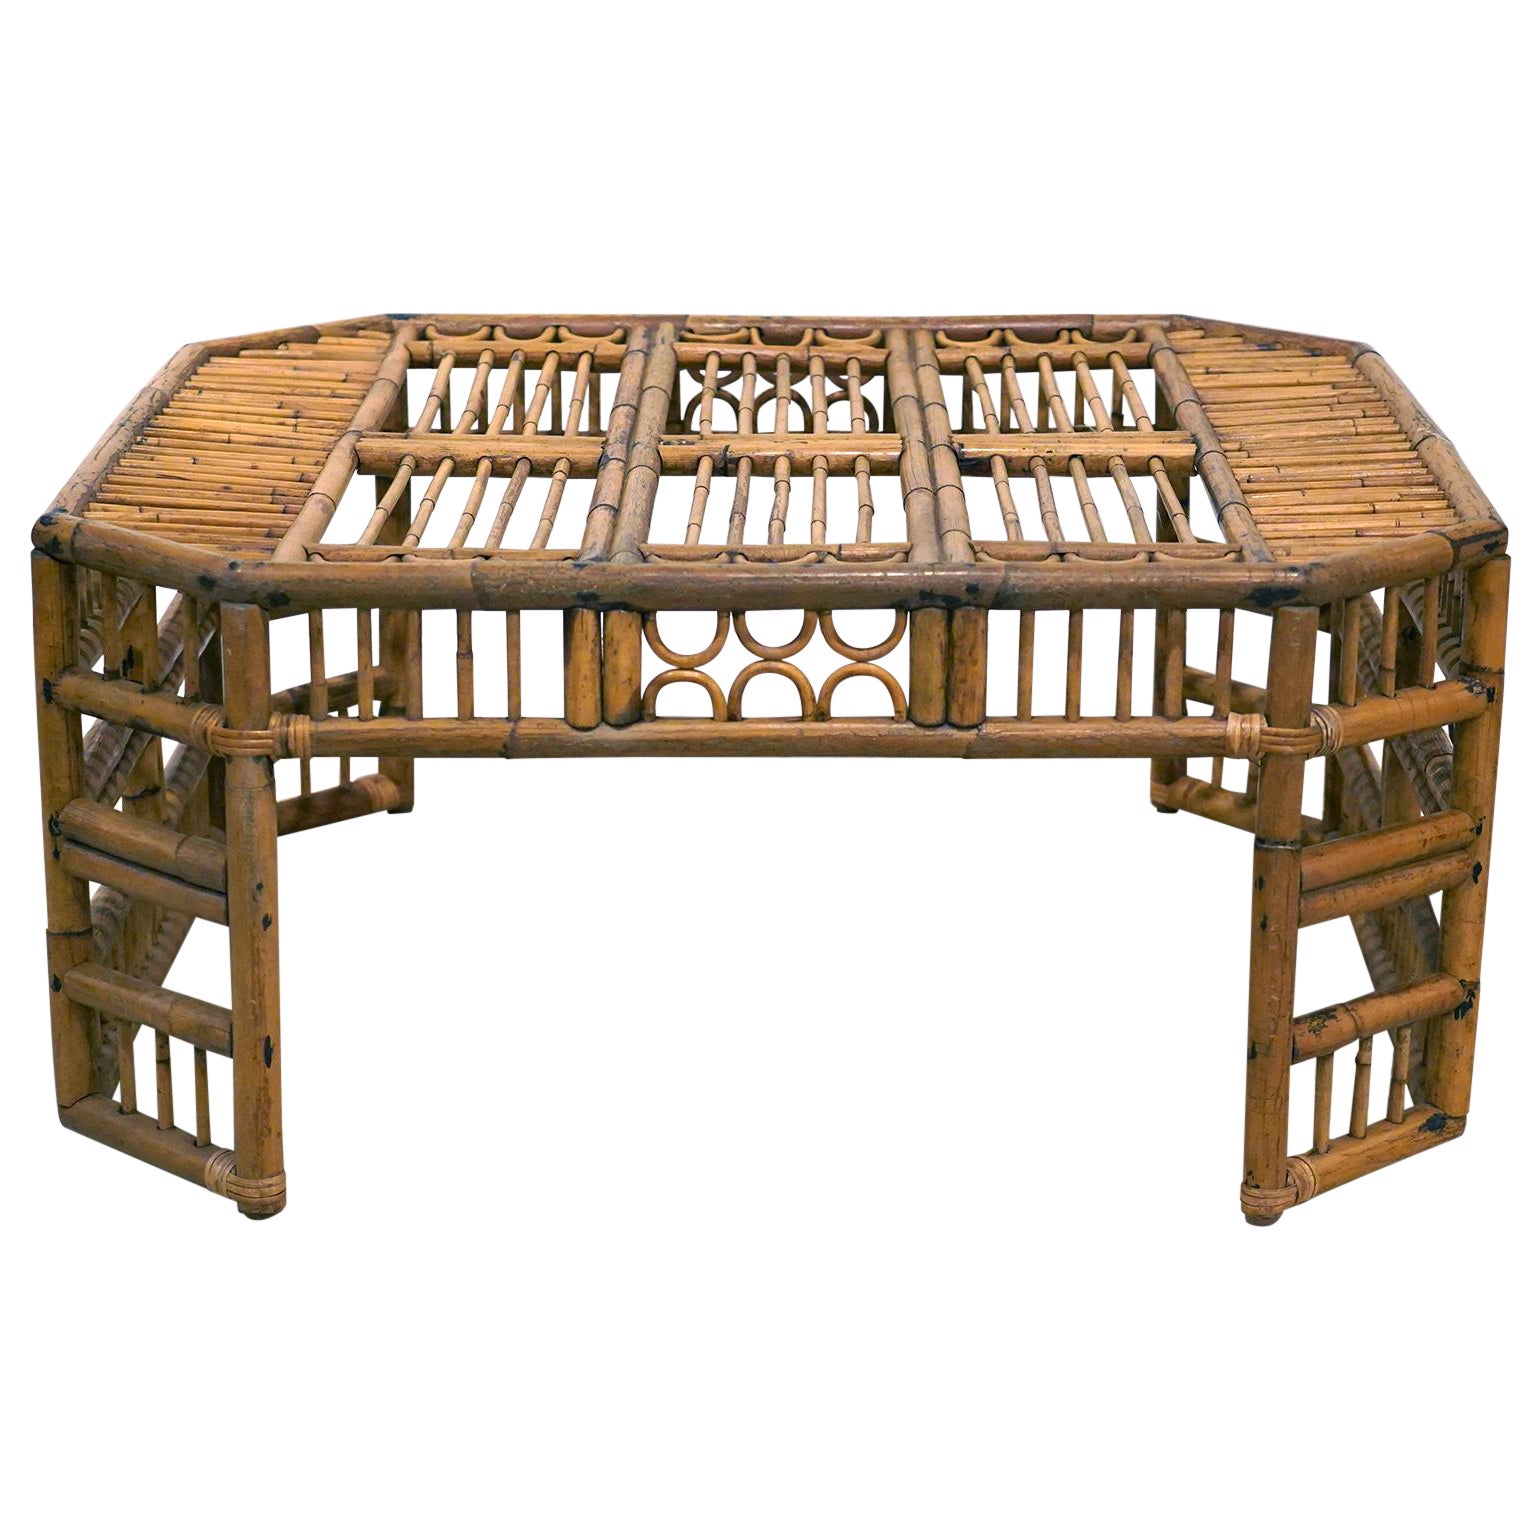 Brighton Pavilion Chinese Chippendale Style Octagonal Bamboo Rattan Coffee Table